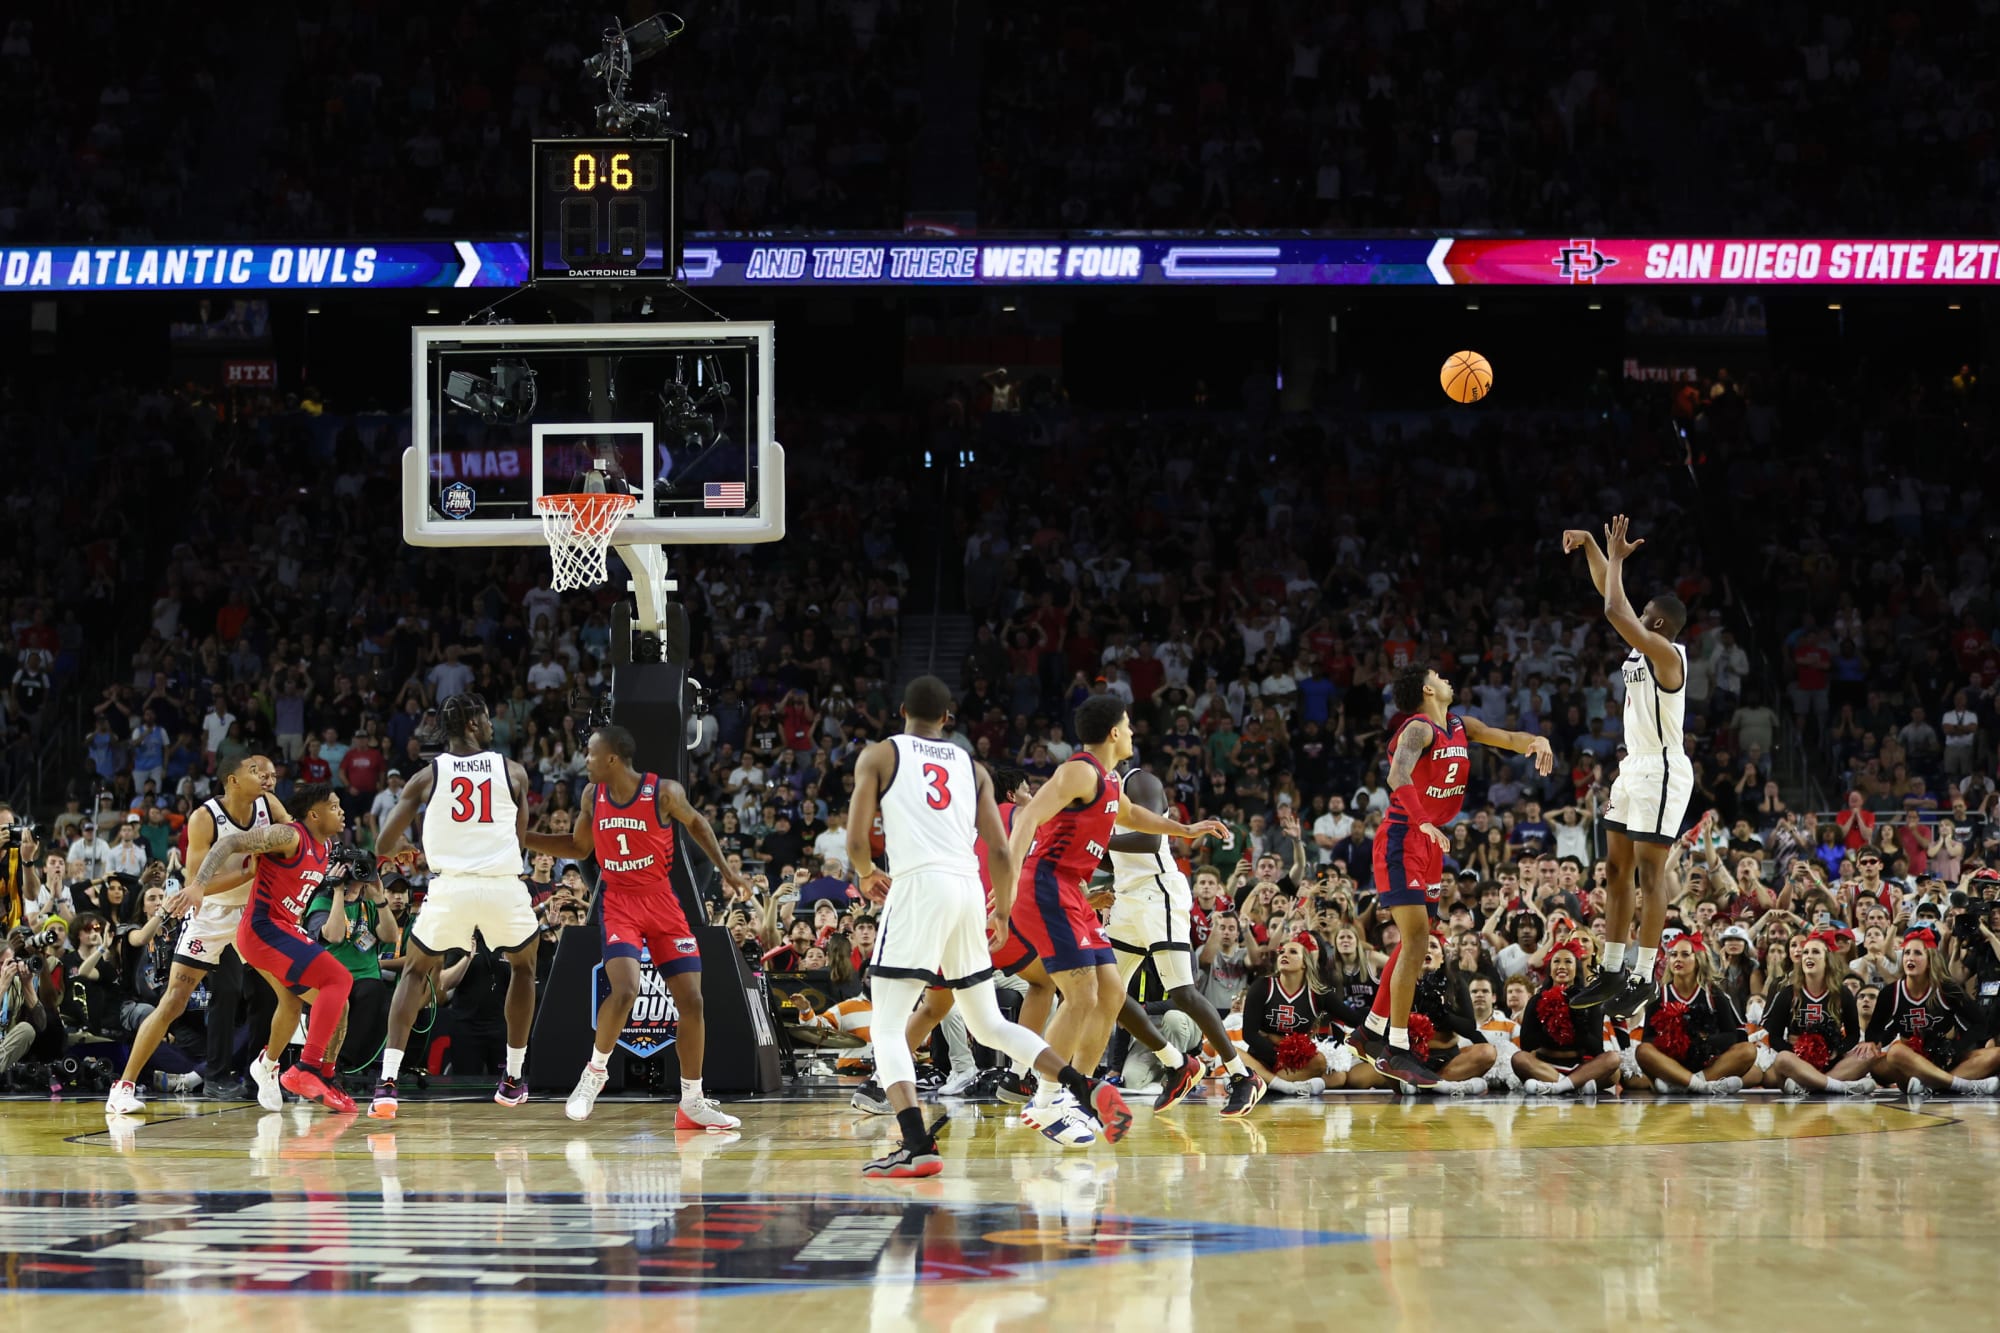 Photo of SDSU radio call of Final Four buzzer beater is immense